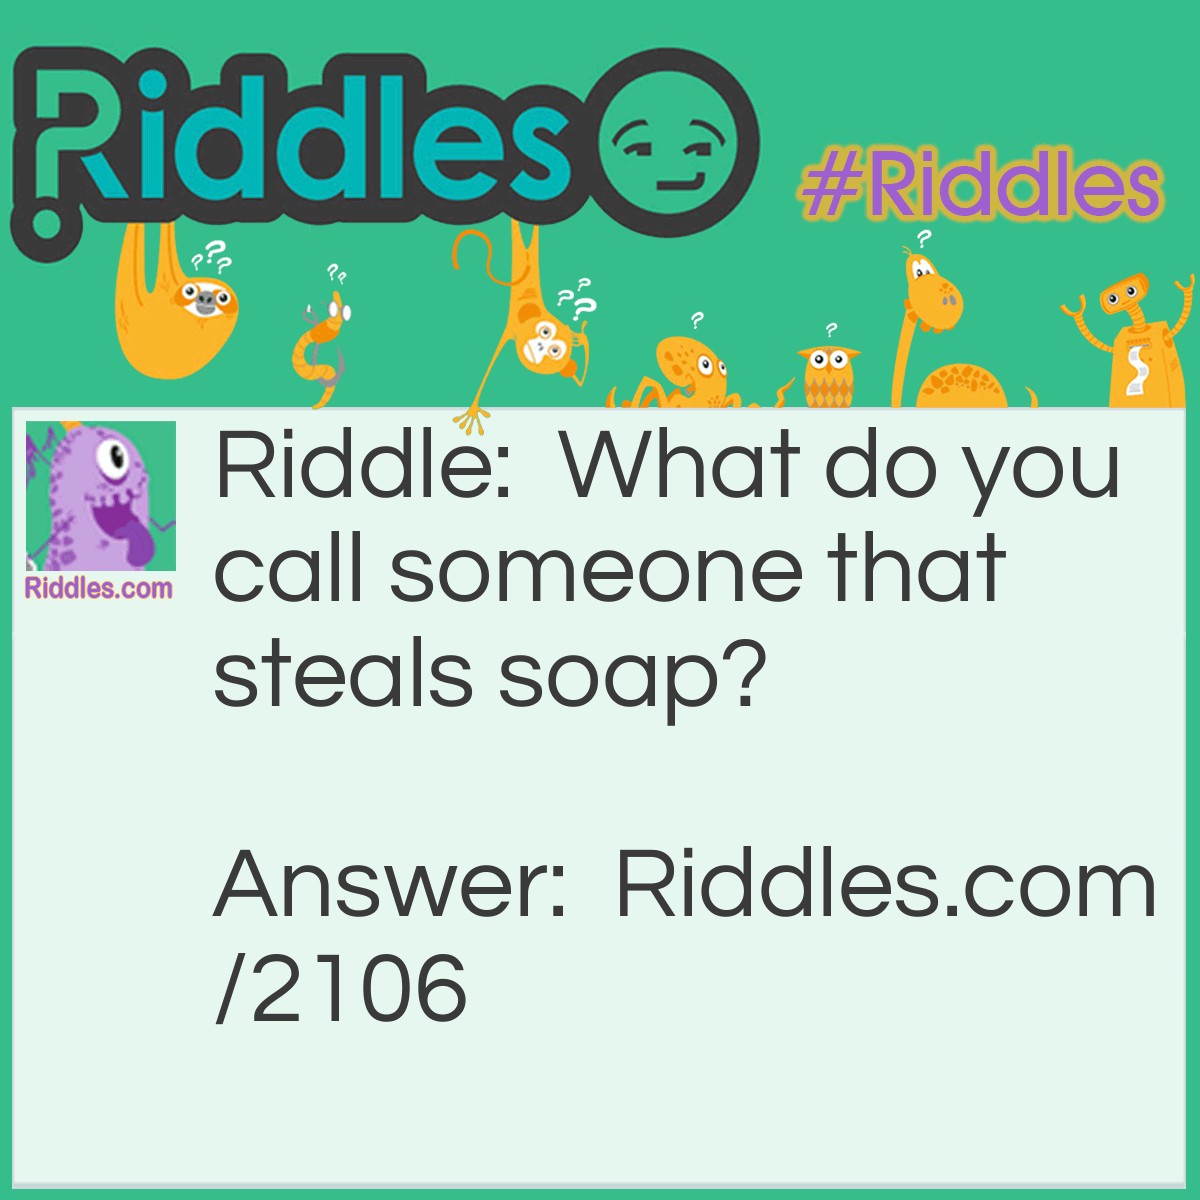 Riddle: What do you call someone that steals soap? Answer: A dirty crook.